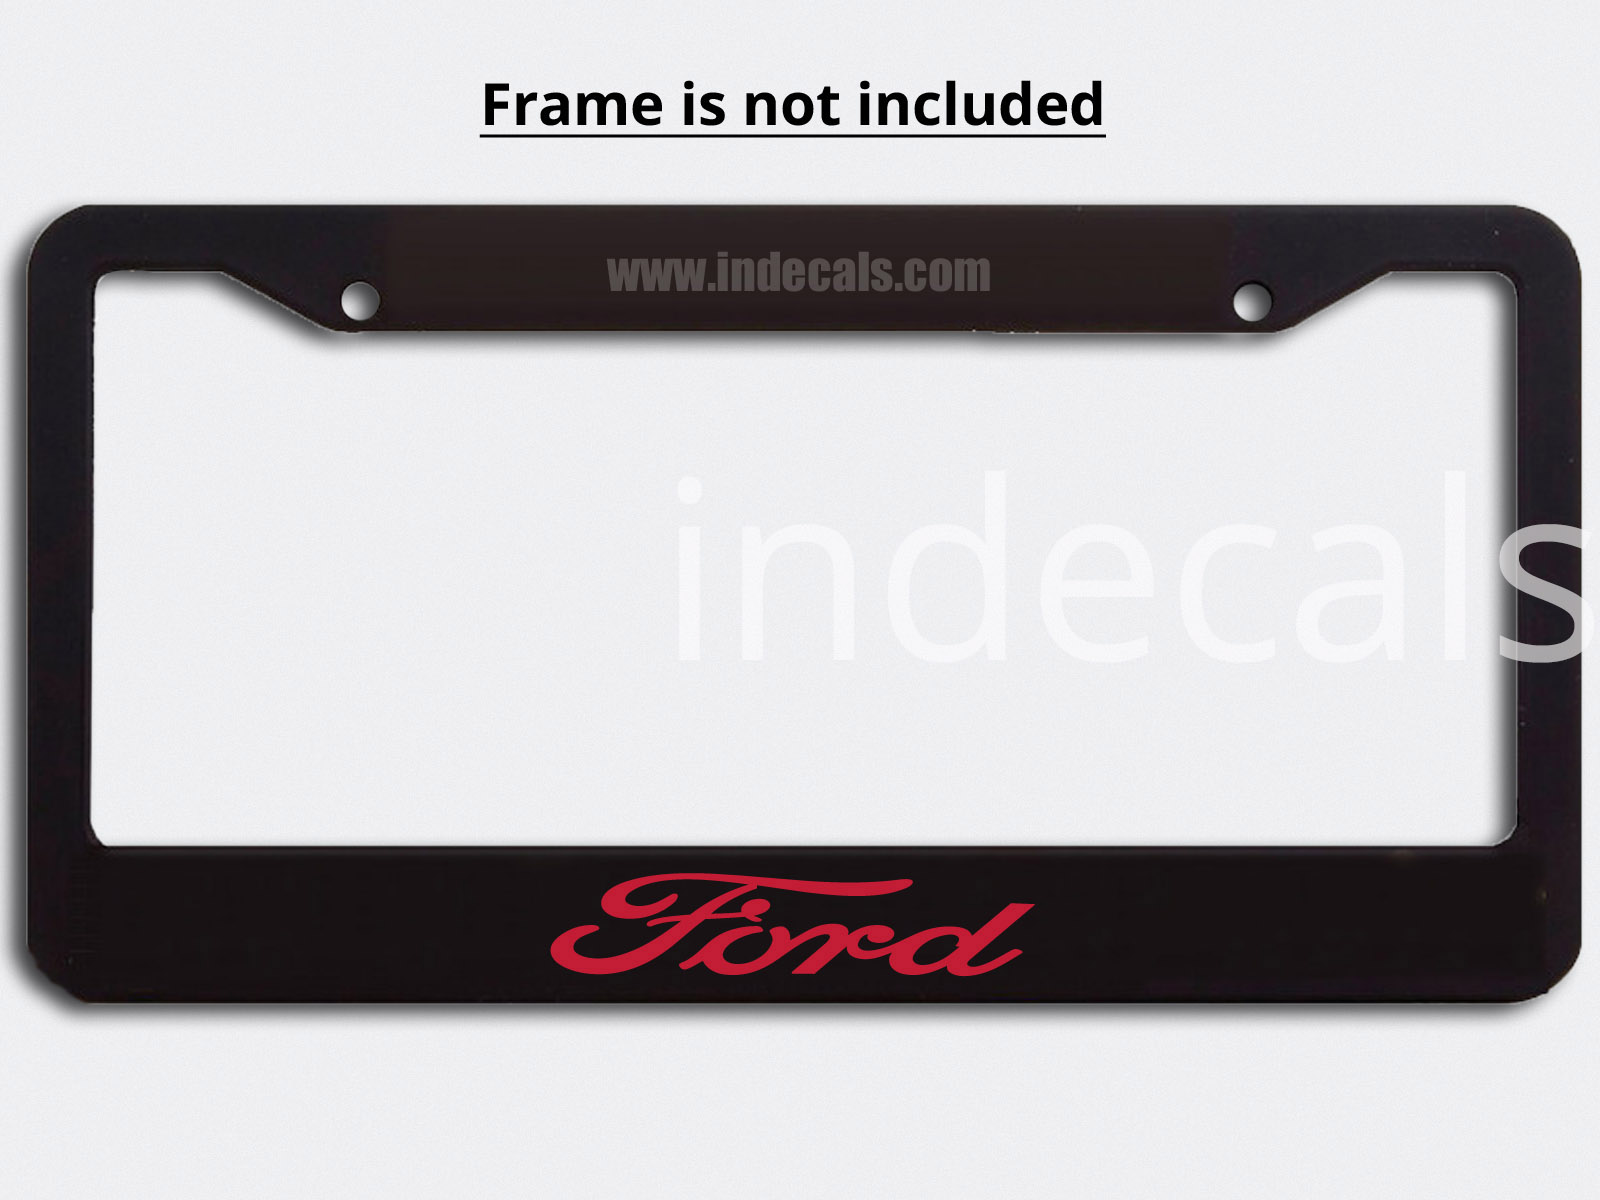 3 x Ford Stickers for Plate Frame - Red